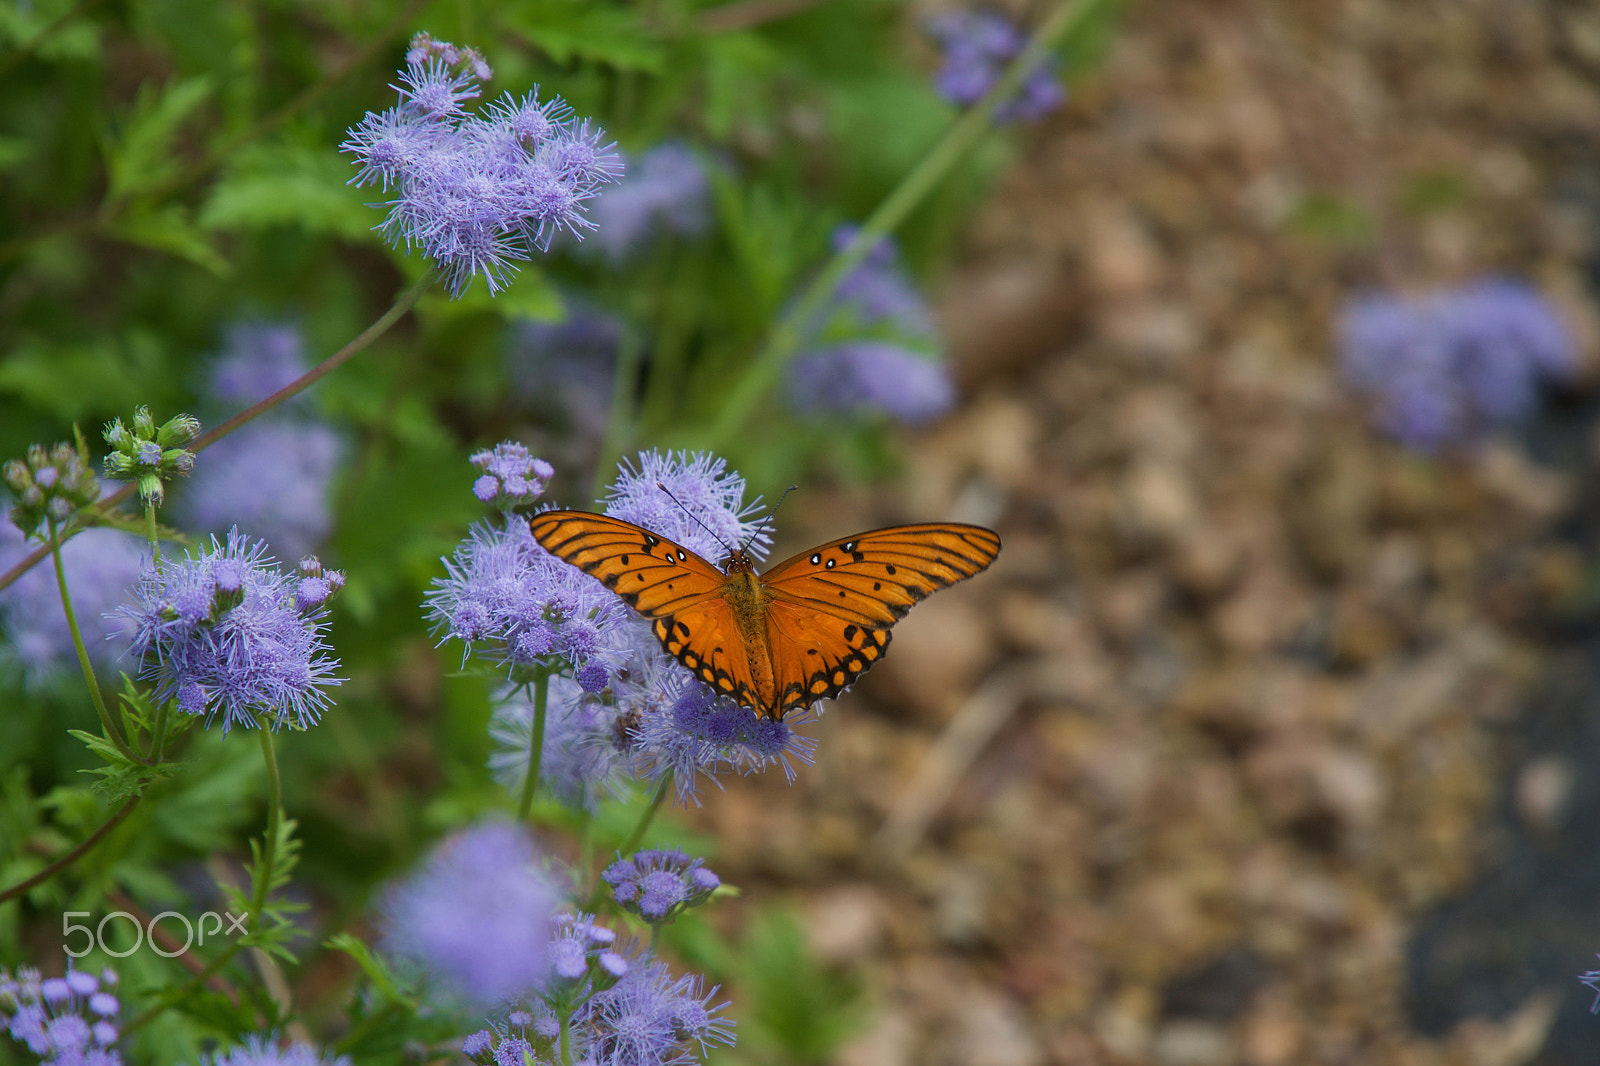 Sony a6000 + Sony E PZ 18-105mm F4 G OSS sample photo. The butterflies in fall photography